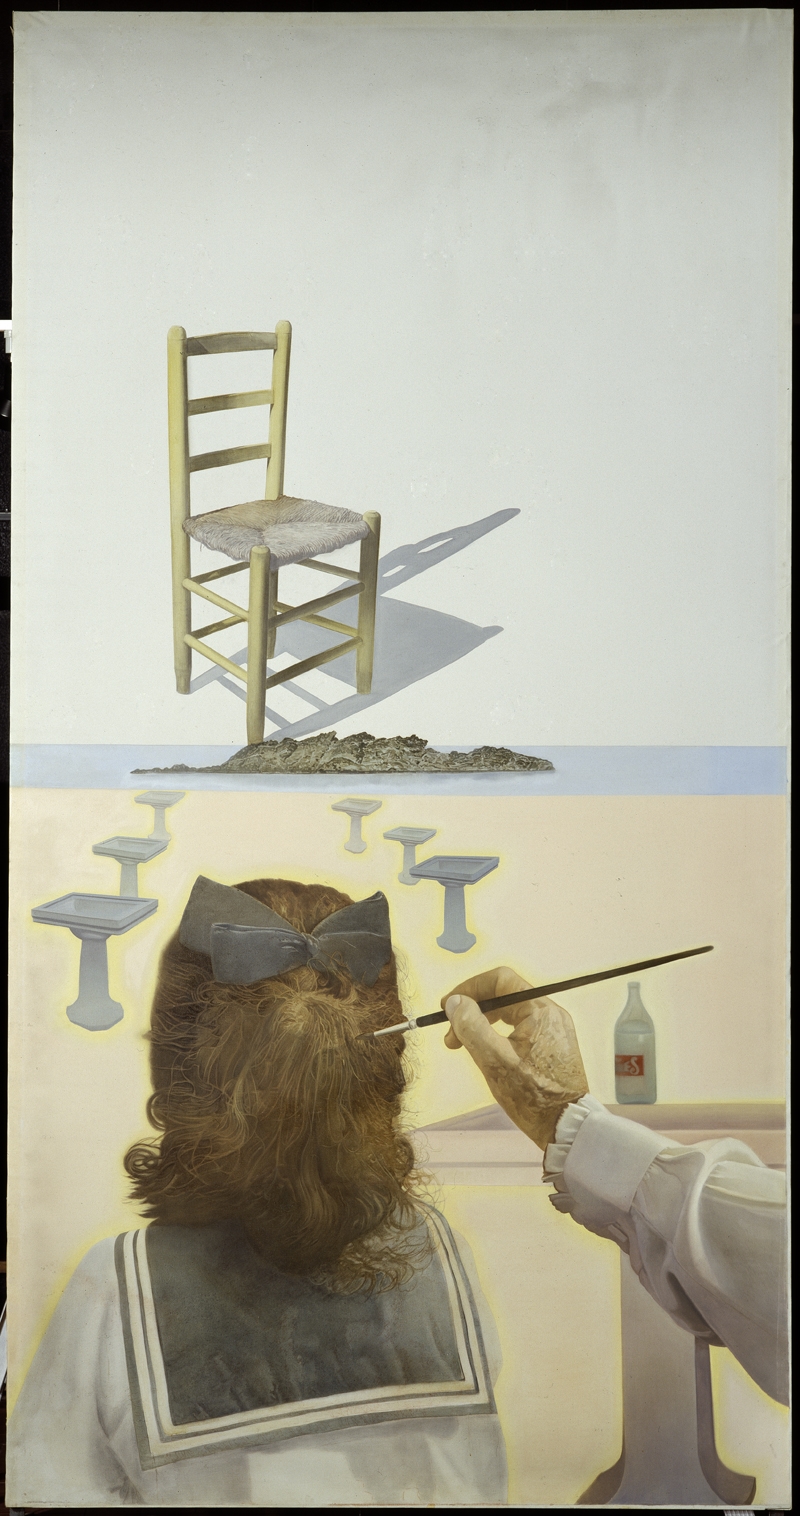 The Chair. Stereoscopic work